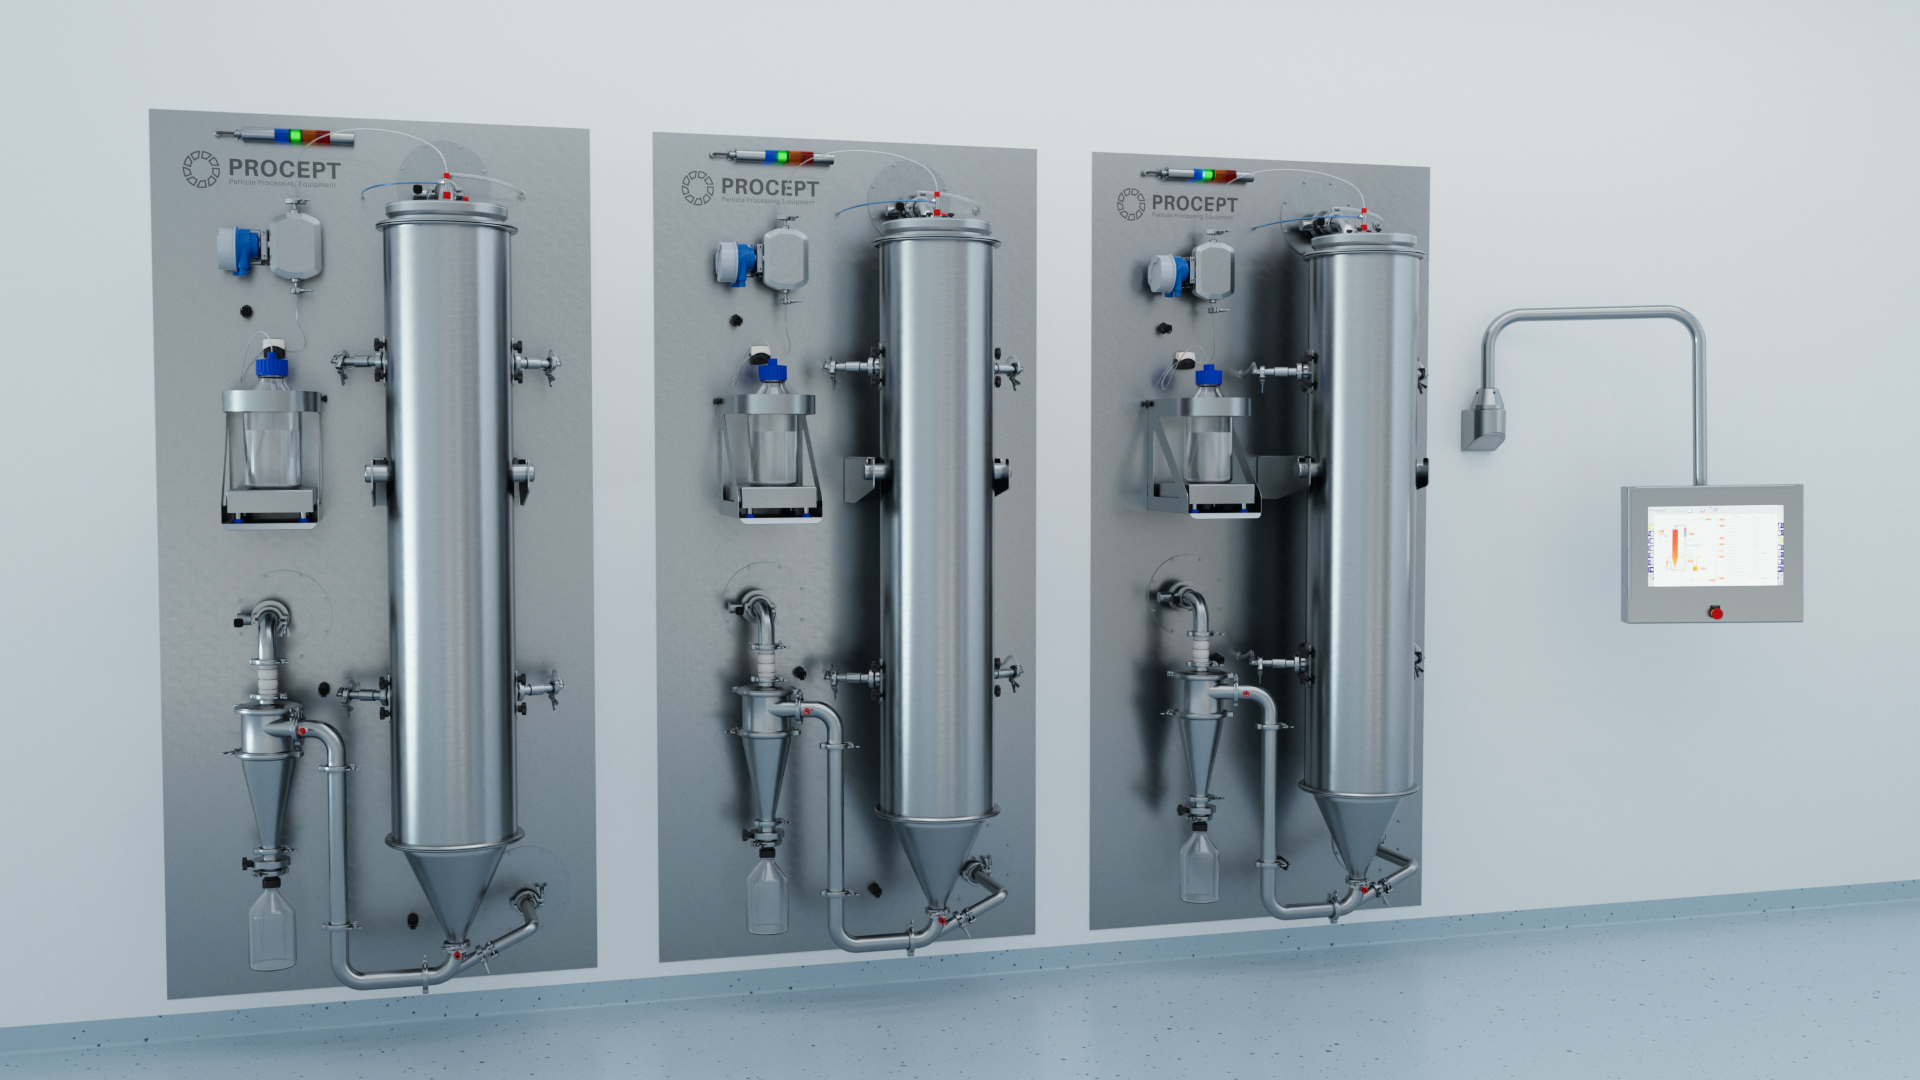 PROCEPT 3 in wall GMP Spray Dryer columns - PROCEPT particle engineering processing equipment